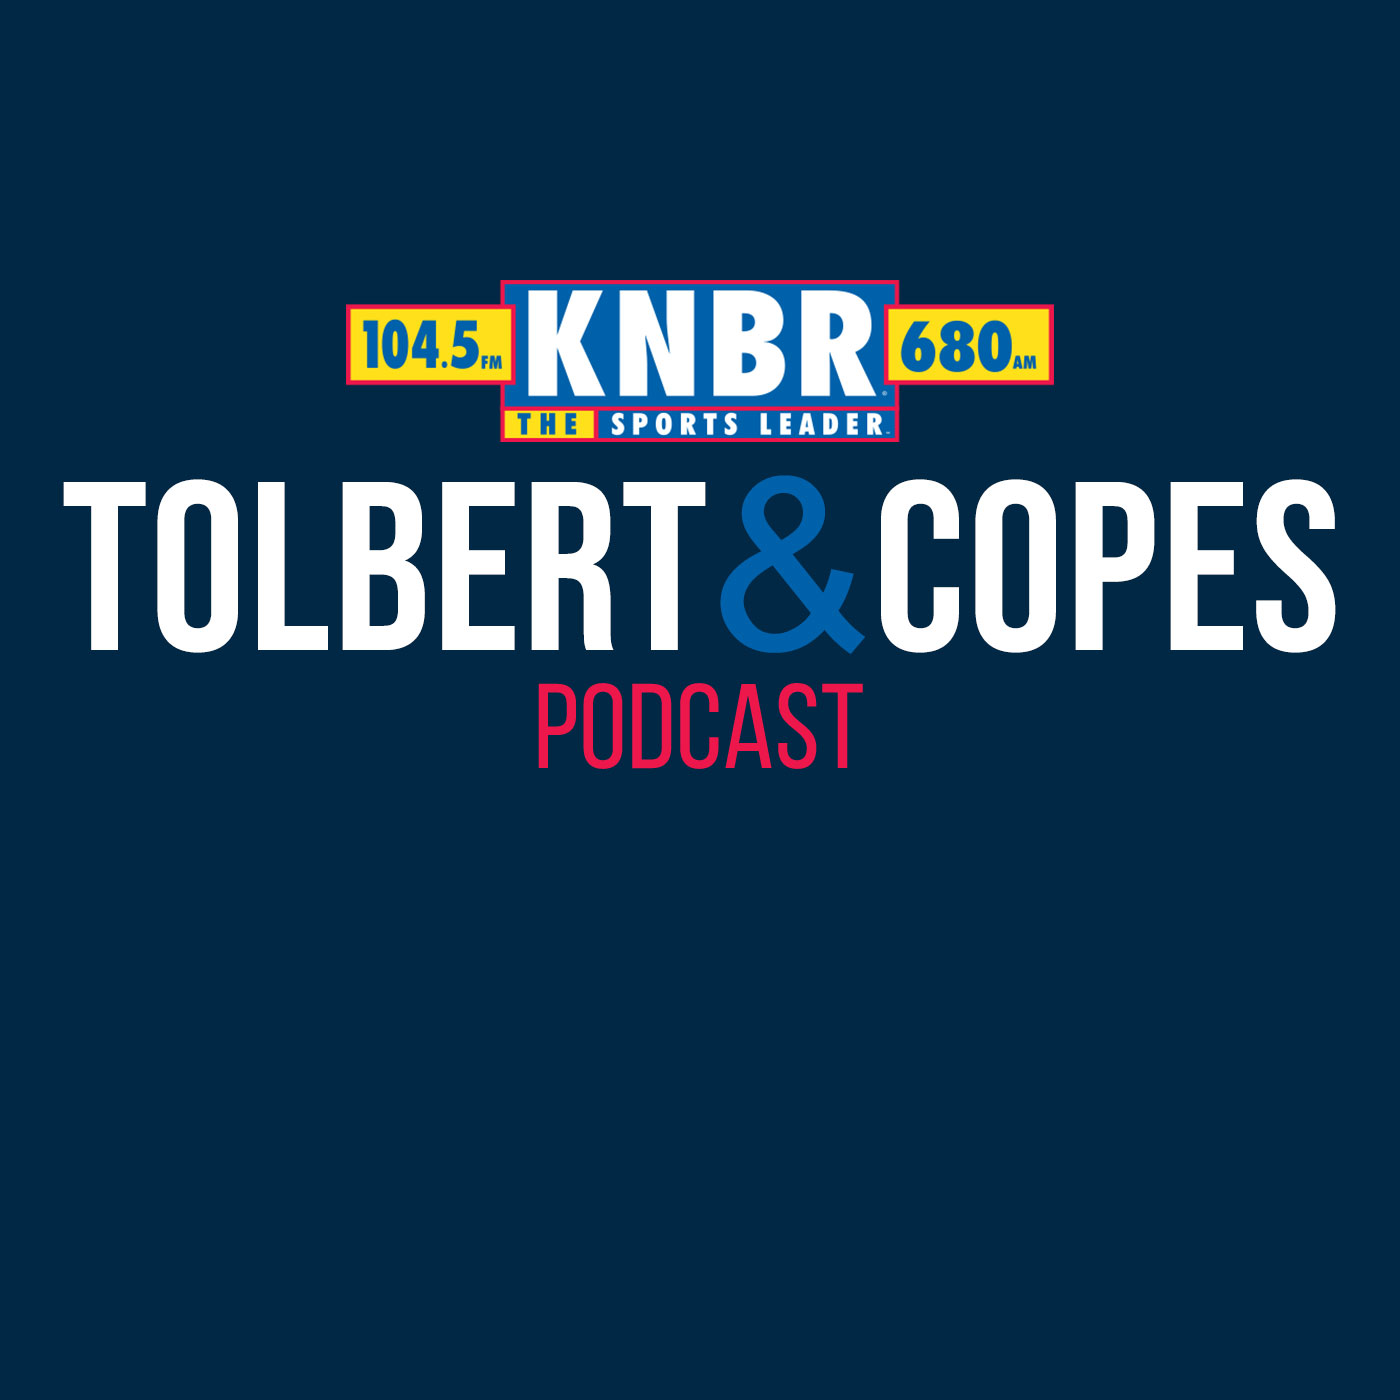 6-14 Ice Cube joins Tolbert & Copes to discuss the Big 3 & his sports fandom